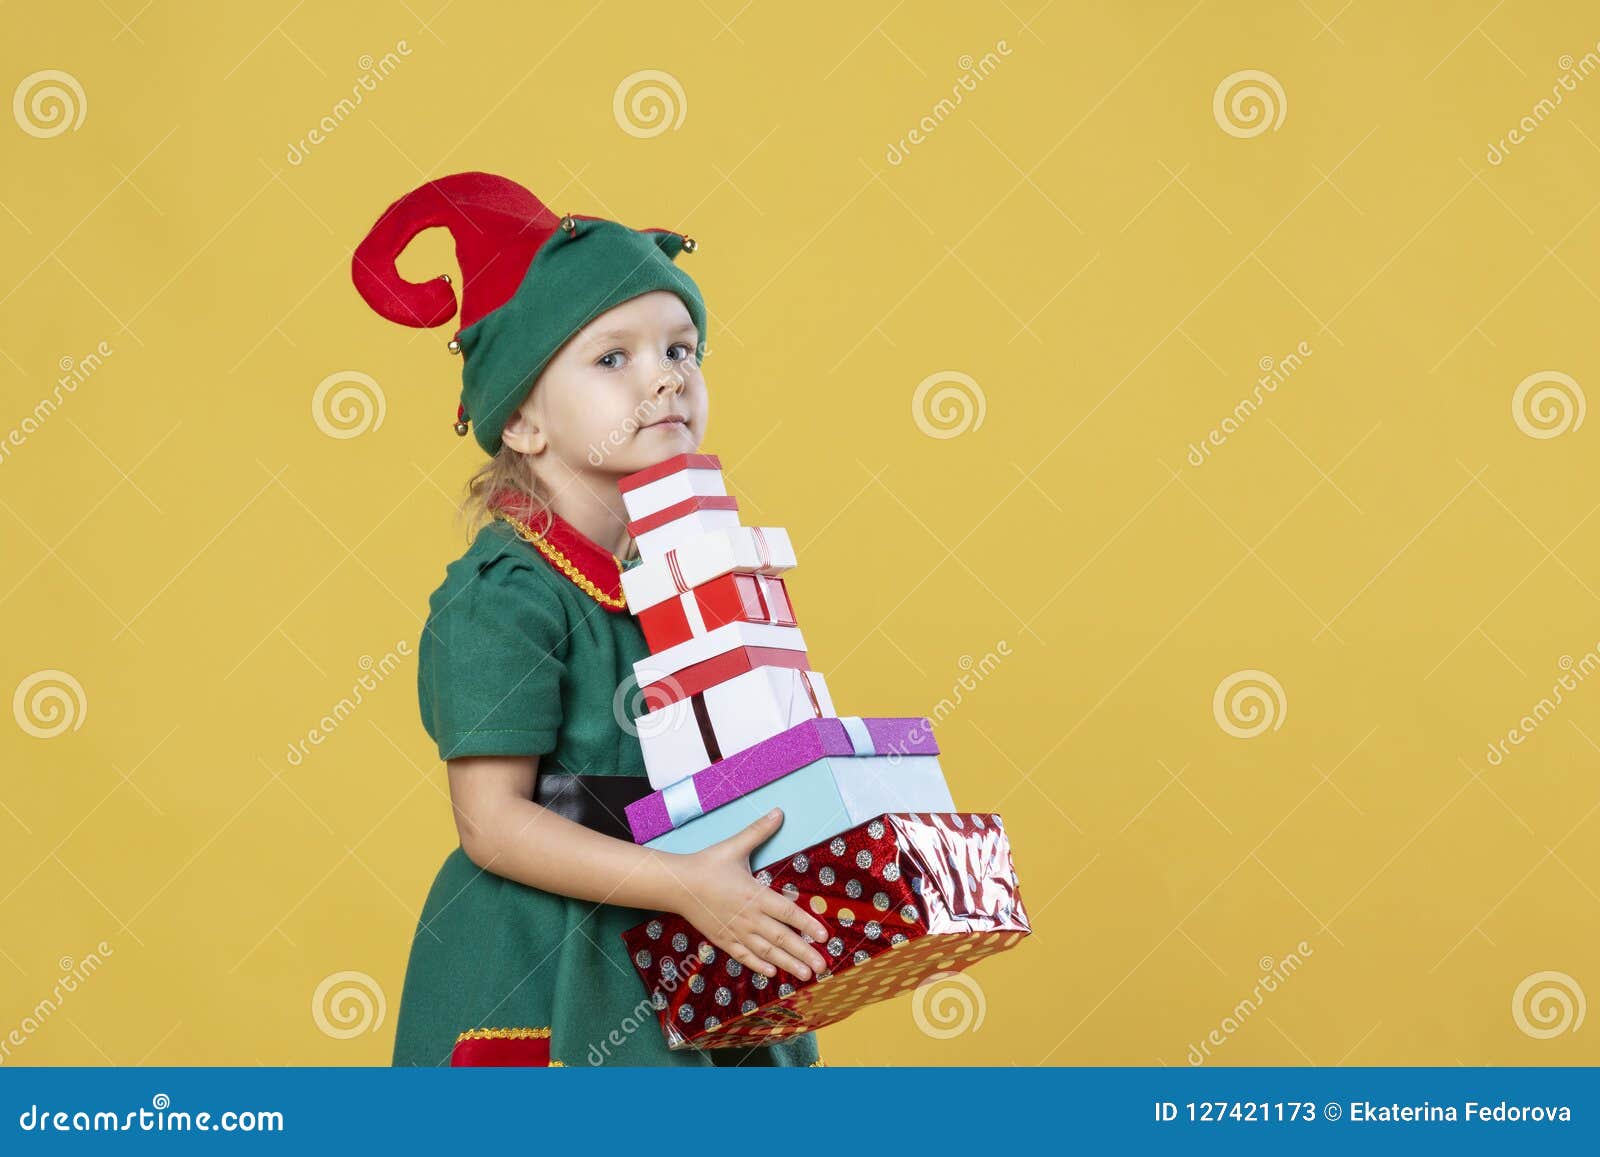 Little Girl In A Christmas Elf Costume On A Yellow